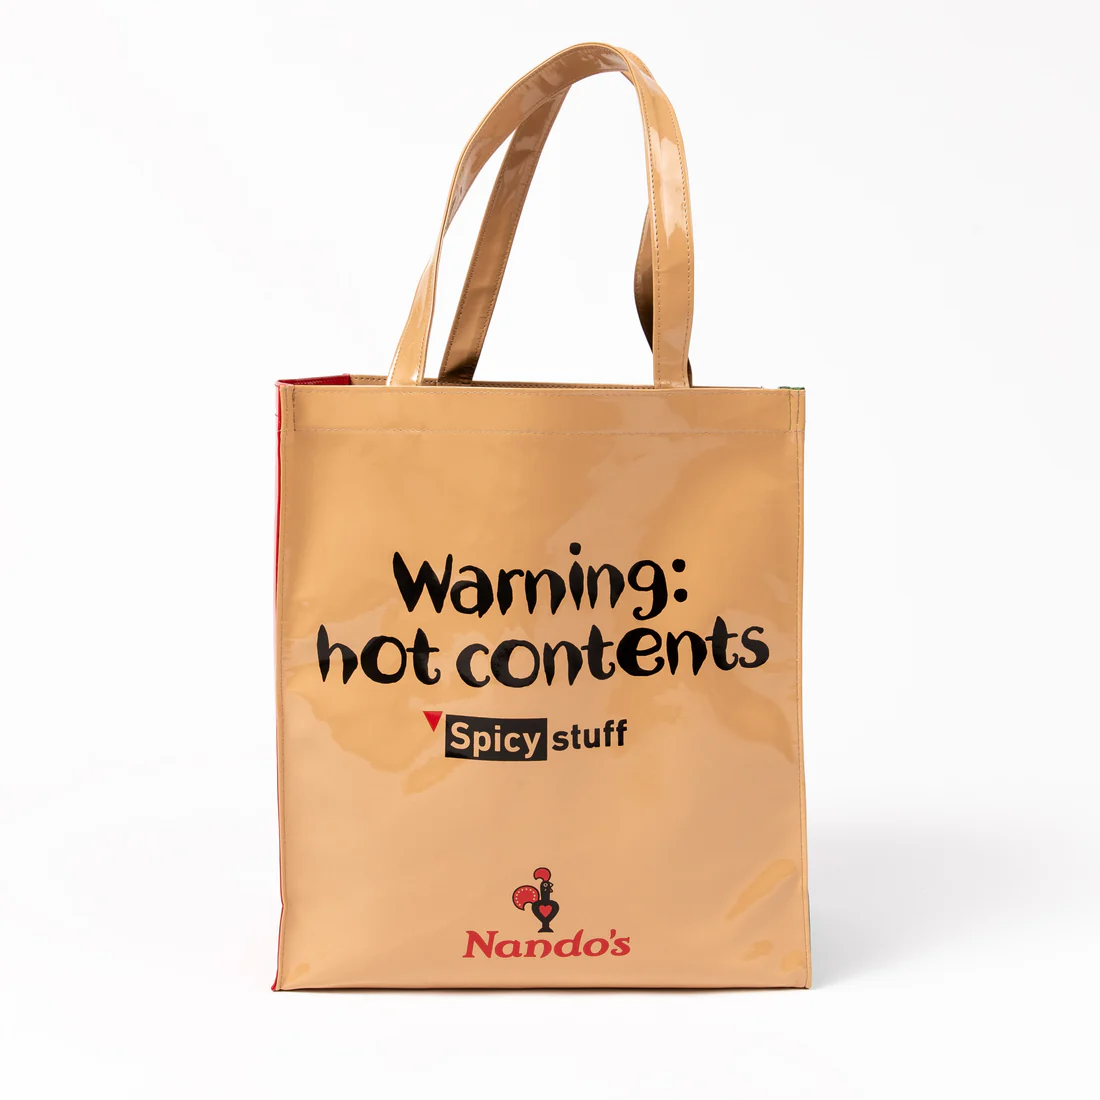 A Nando’s takeaway bag redesigned as a bag for life.